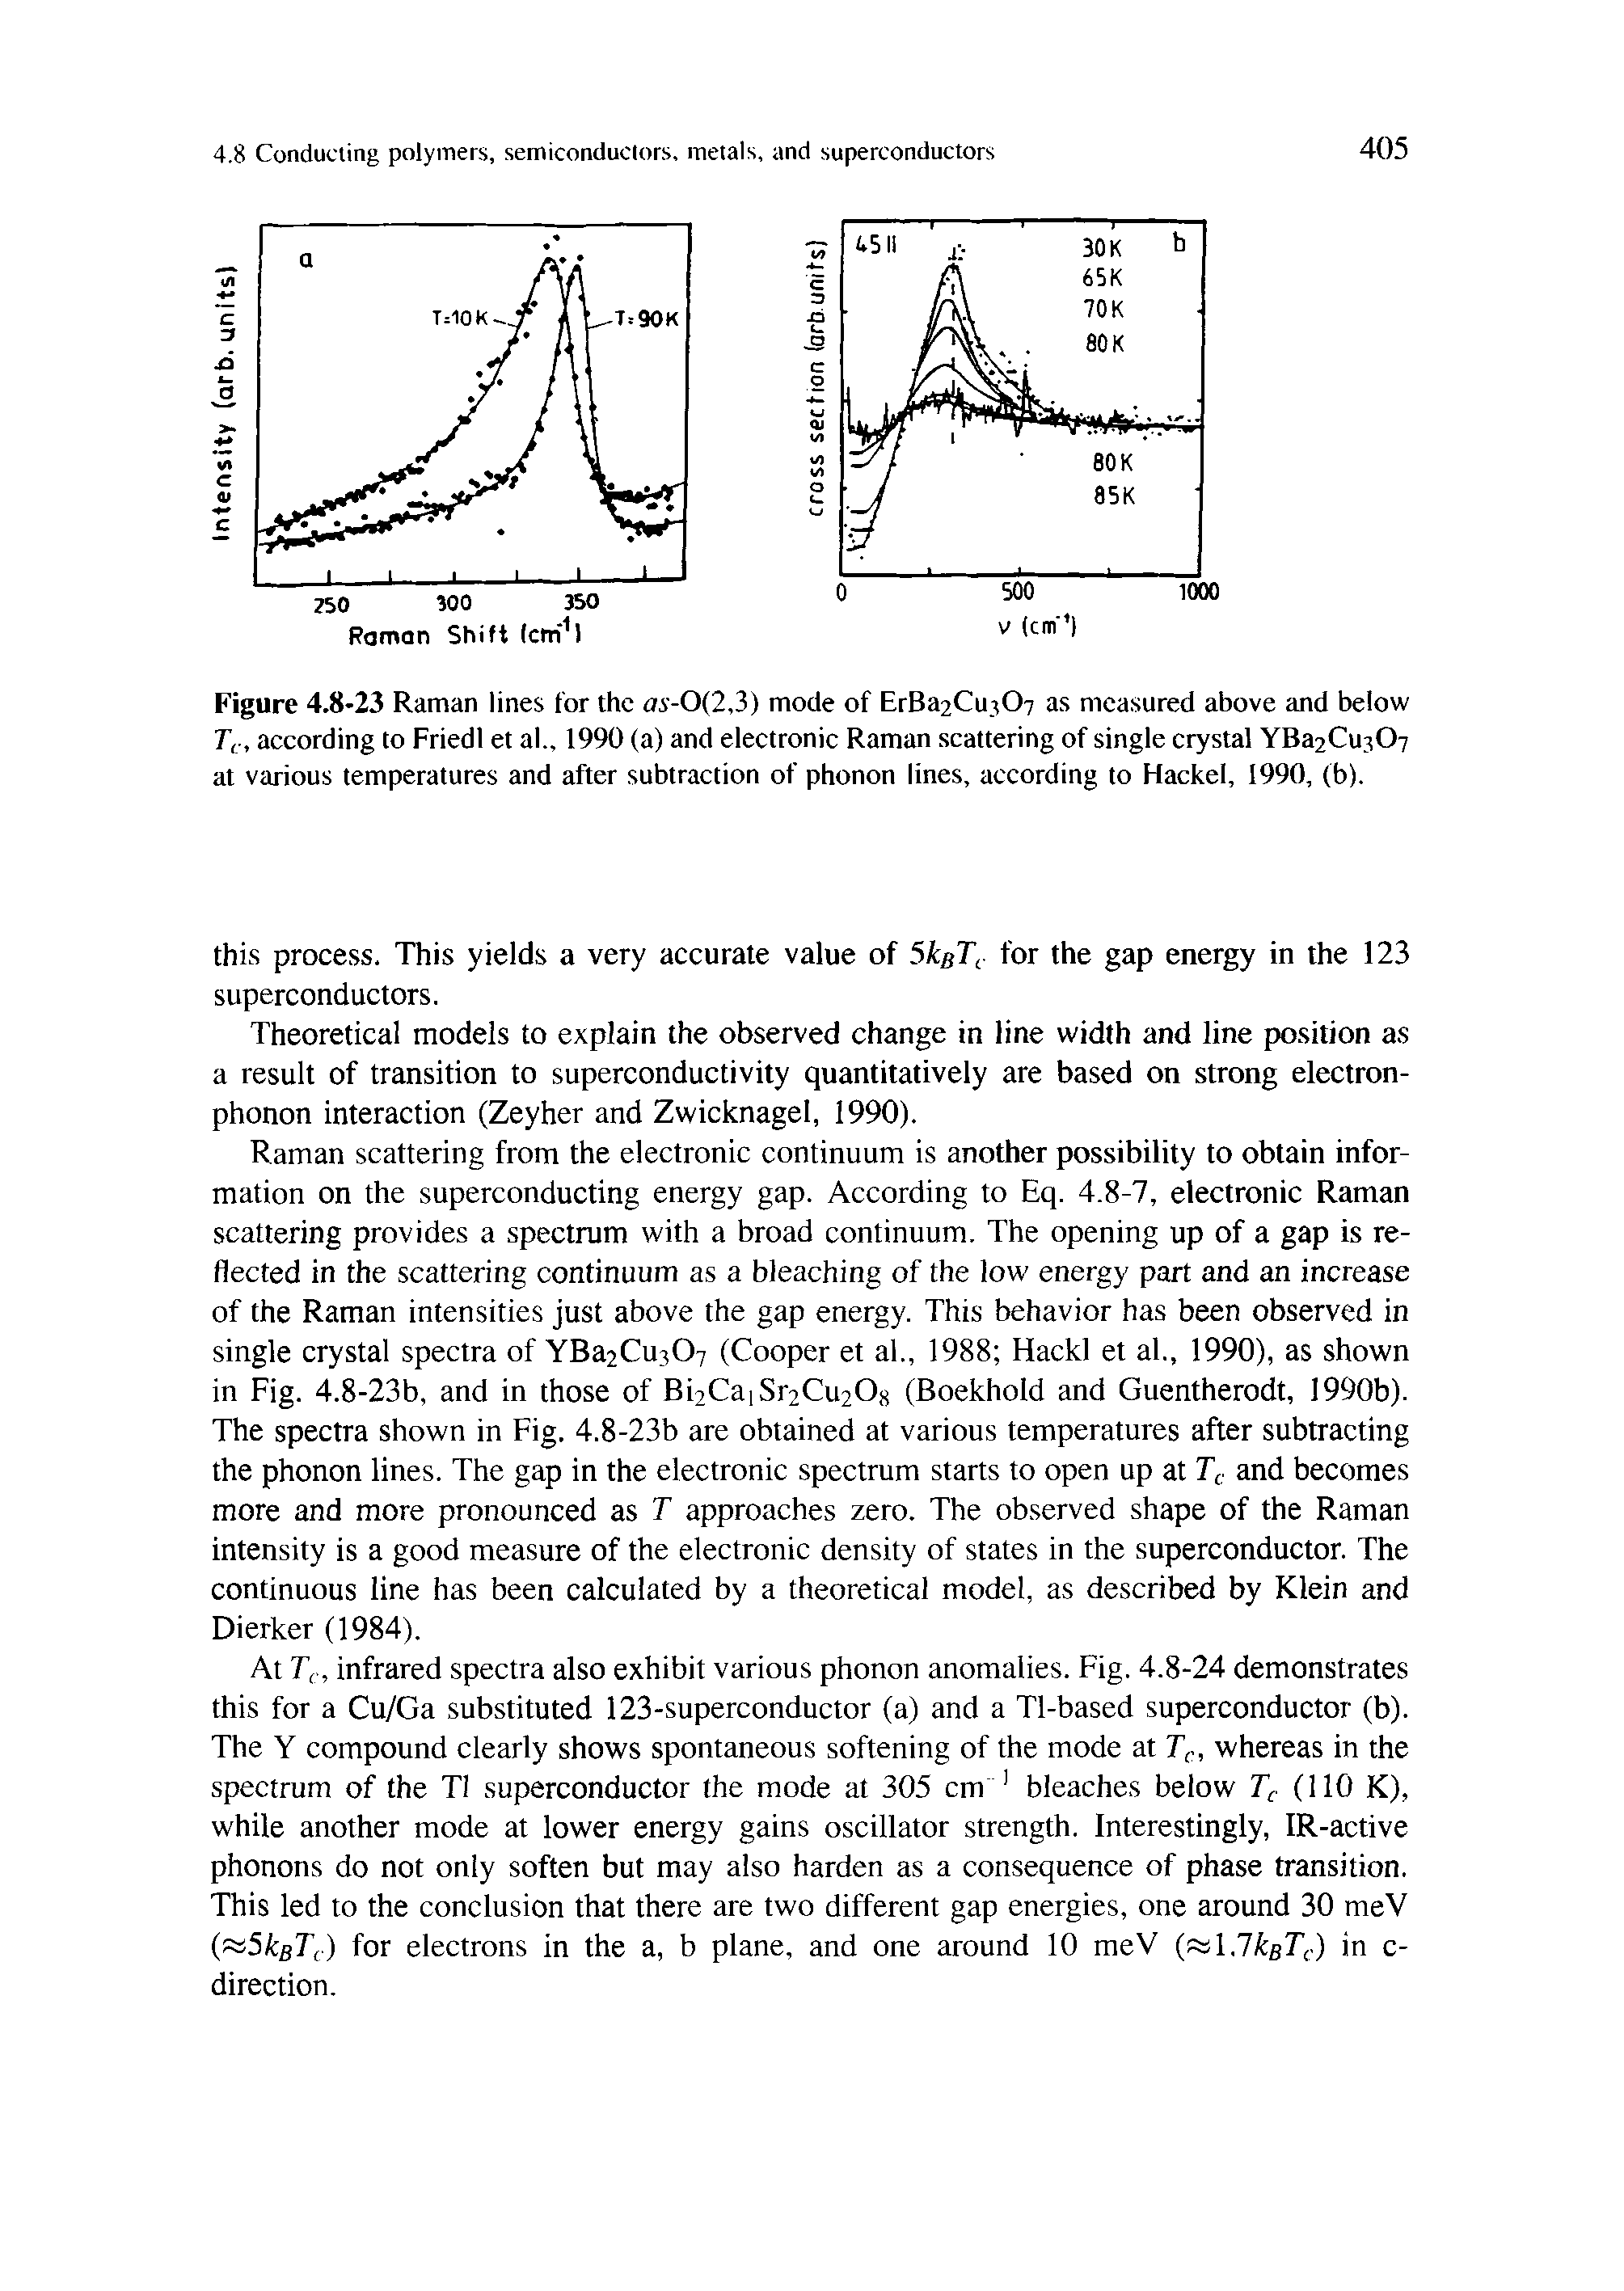 Figure 4.8-23 Raman lines for the ai-0(2,3) mode of ErBa2Cut07 as measured above and below Tc, according to FriedI et al., 1990 (a) and electronic Raman scattering of single crystal YBa2Cu307 at various temperatures and after subtraction of phonon lines, according to Hackel, 1990, (b).